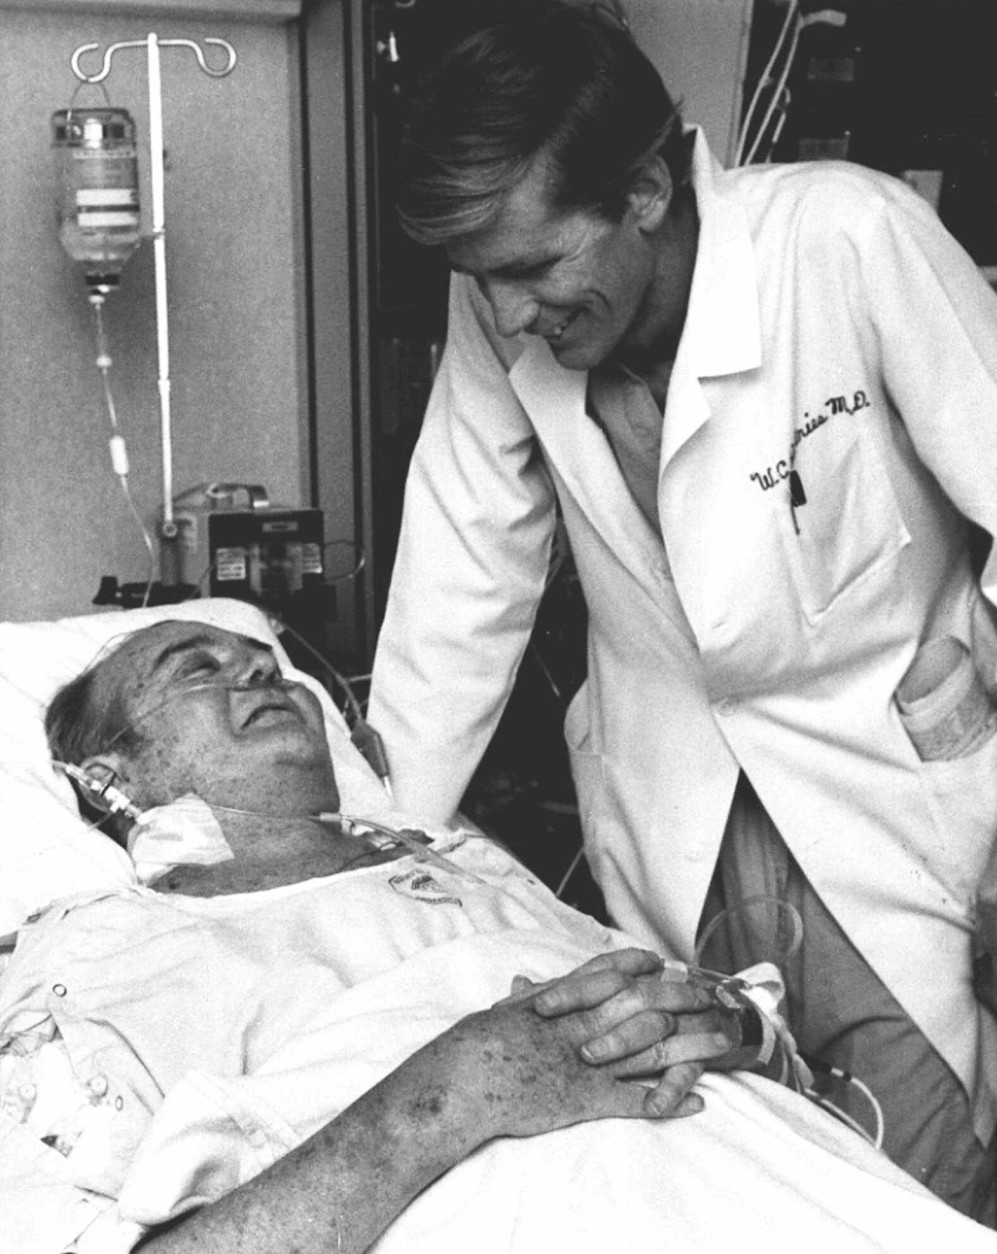 Artificial heart recipiant Barney B. Clark, left, smiles at his surgeon, Dr. William DeVries, in Salt Lake City, in this Dec. 3, 1982 photo. Clark, who lived 112 days with the Jarvik-7 heart after the landmark surgery, had little expectation of longtime survival. "He had faced his mortality," said his widow UnaLoy Clark-Ferrar. "He knew he was going to die. He knew he had to be in that position (for doctors) to consider him. He saw it as a real opportunity for him to contribute something to medical science. That was the reason he did it." (AP Photo)